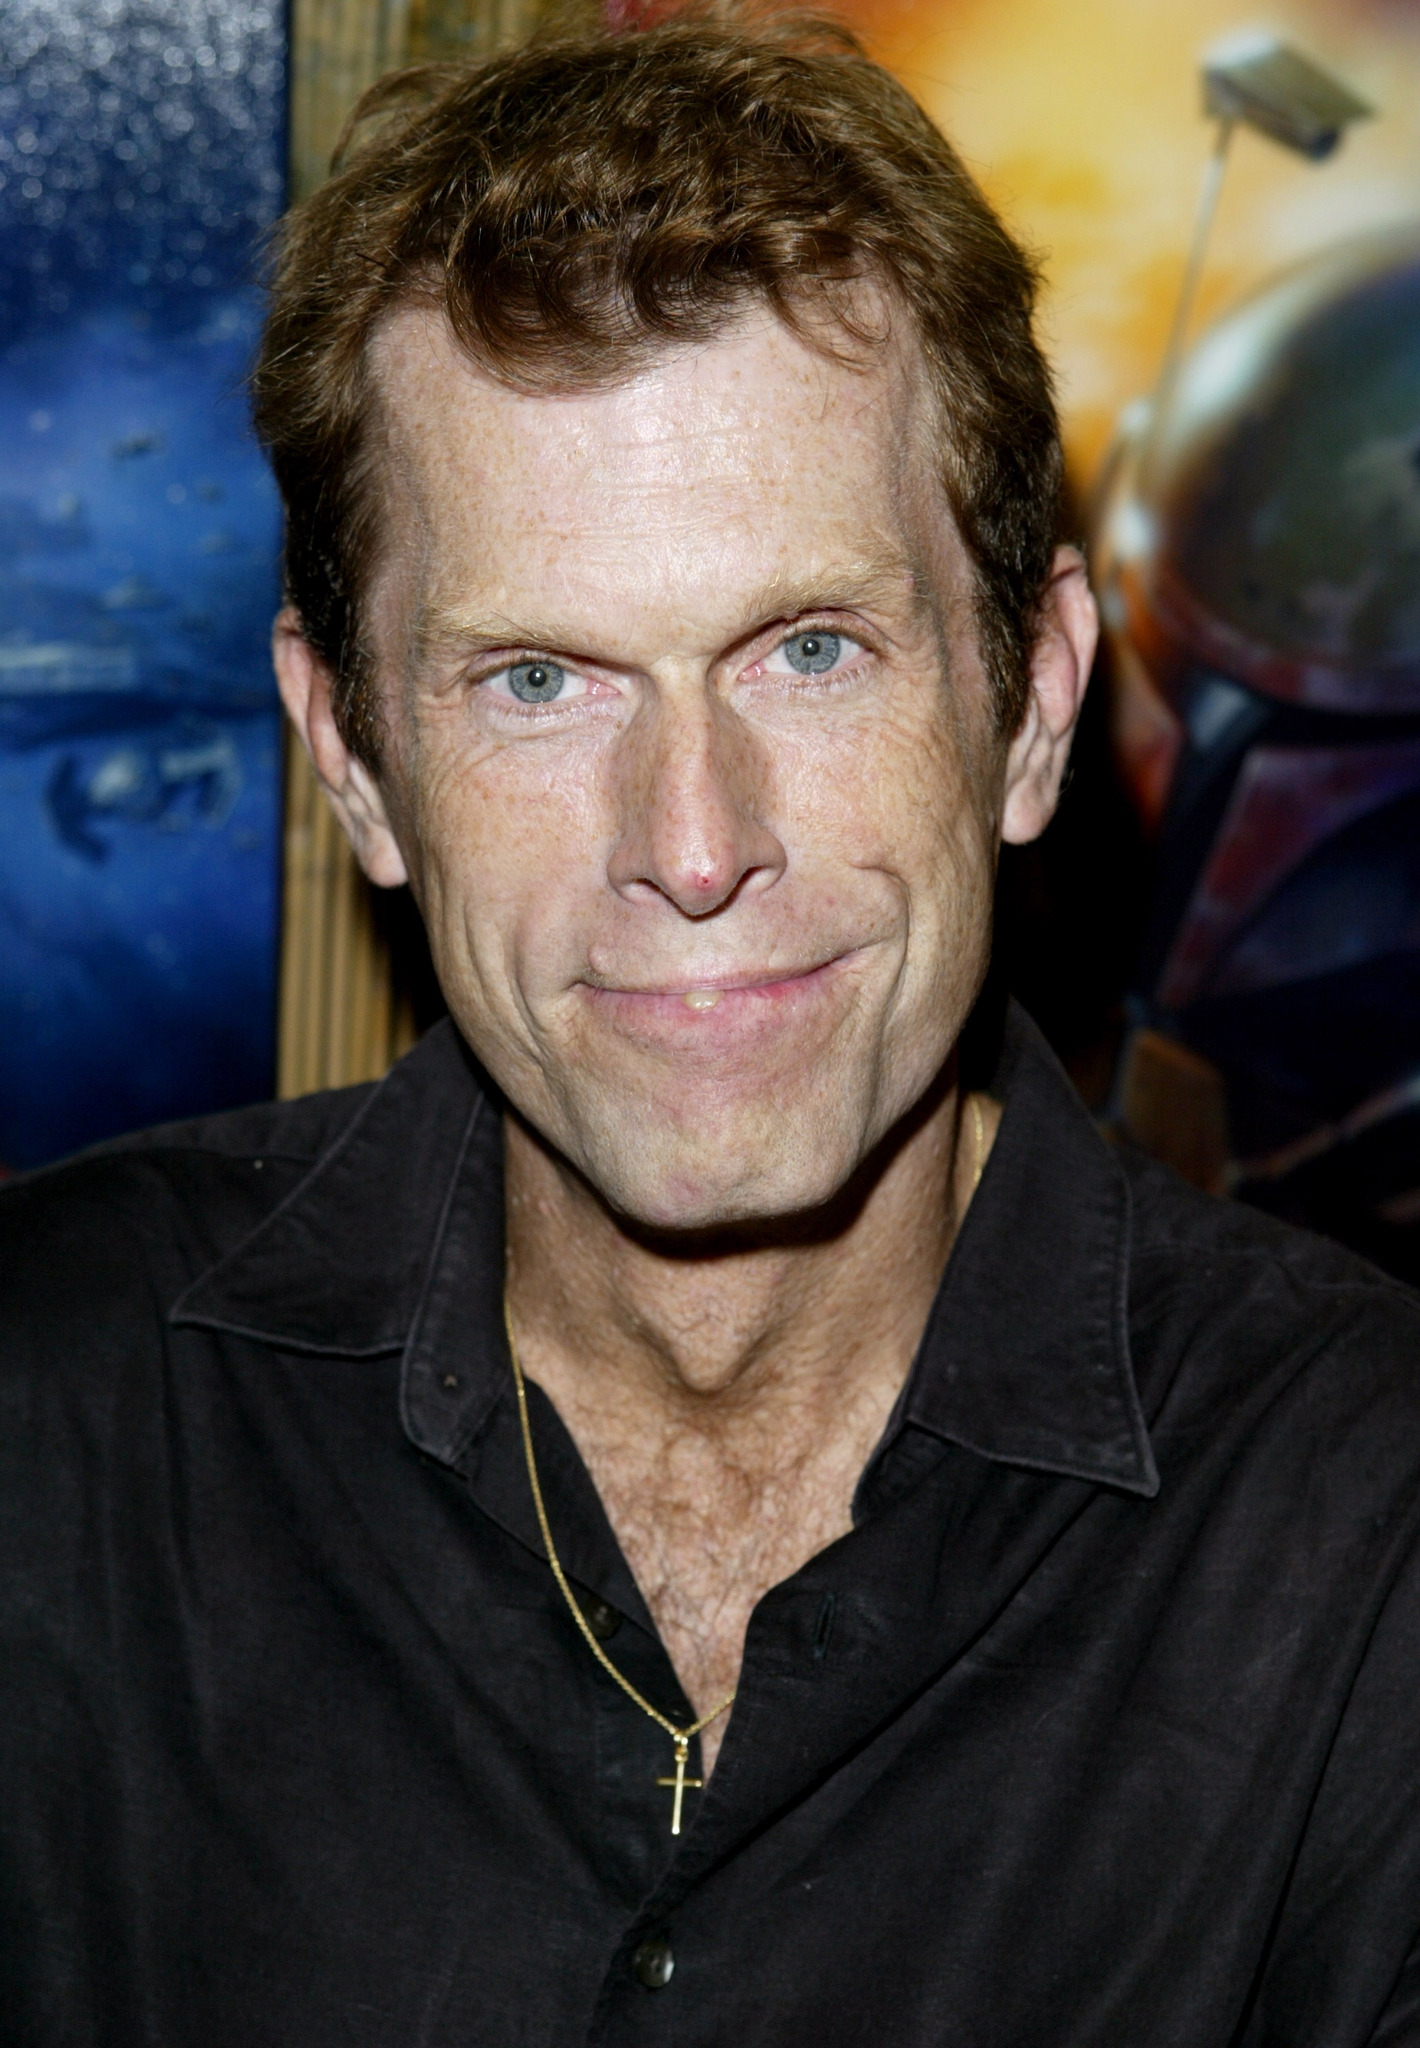 The Howler  Kevin Conroy